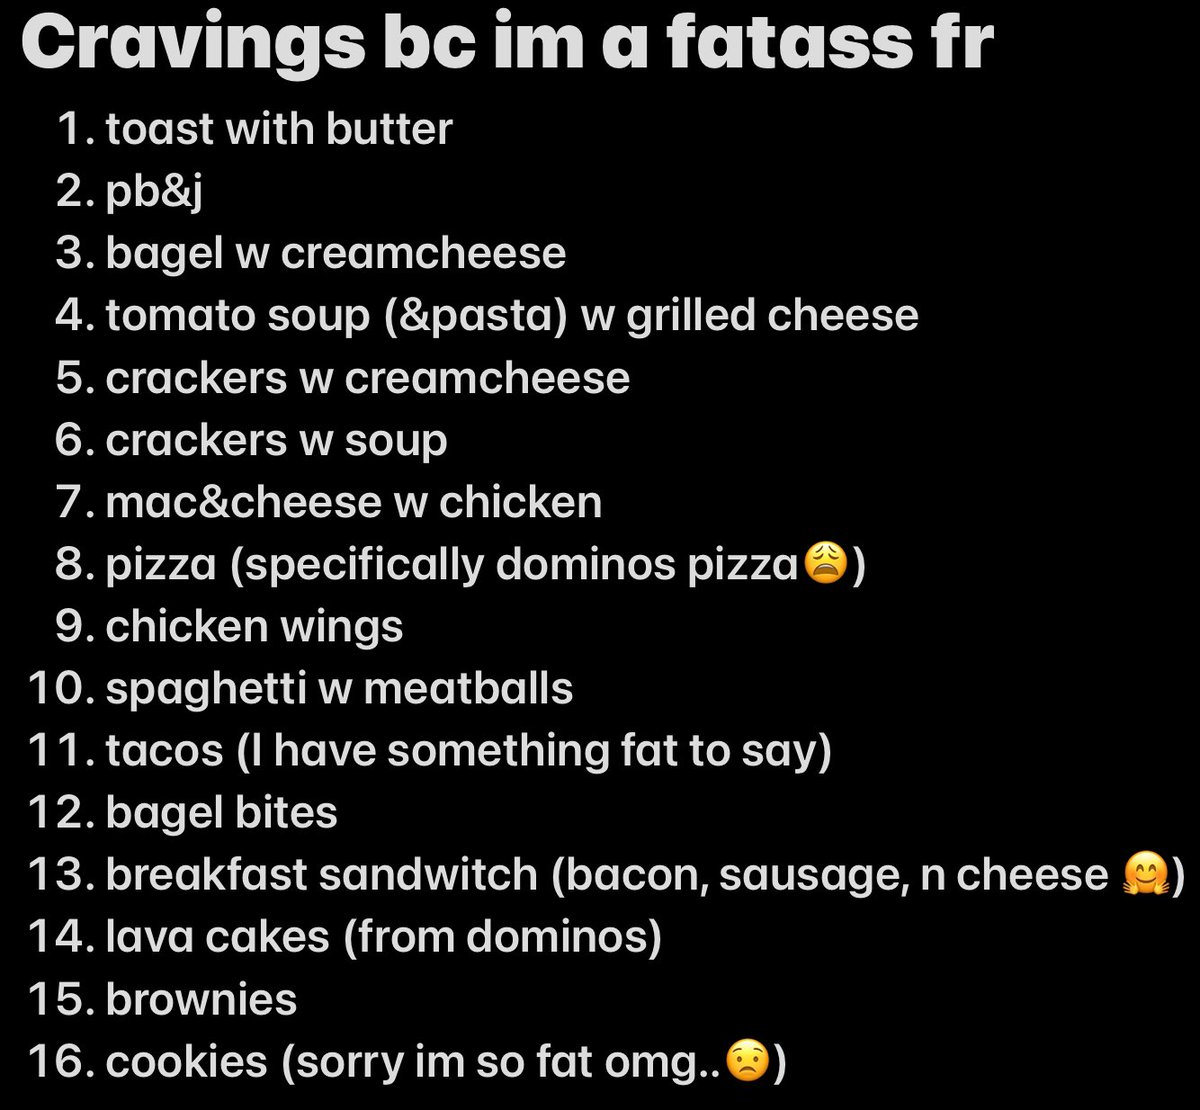 wrote my cravings down bc i WANNA EAT..but im not even hungry 🫡